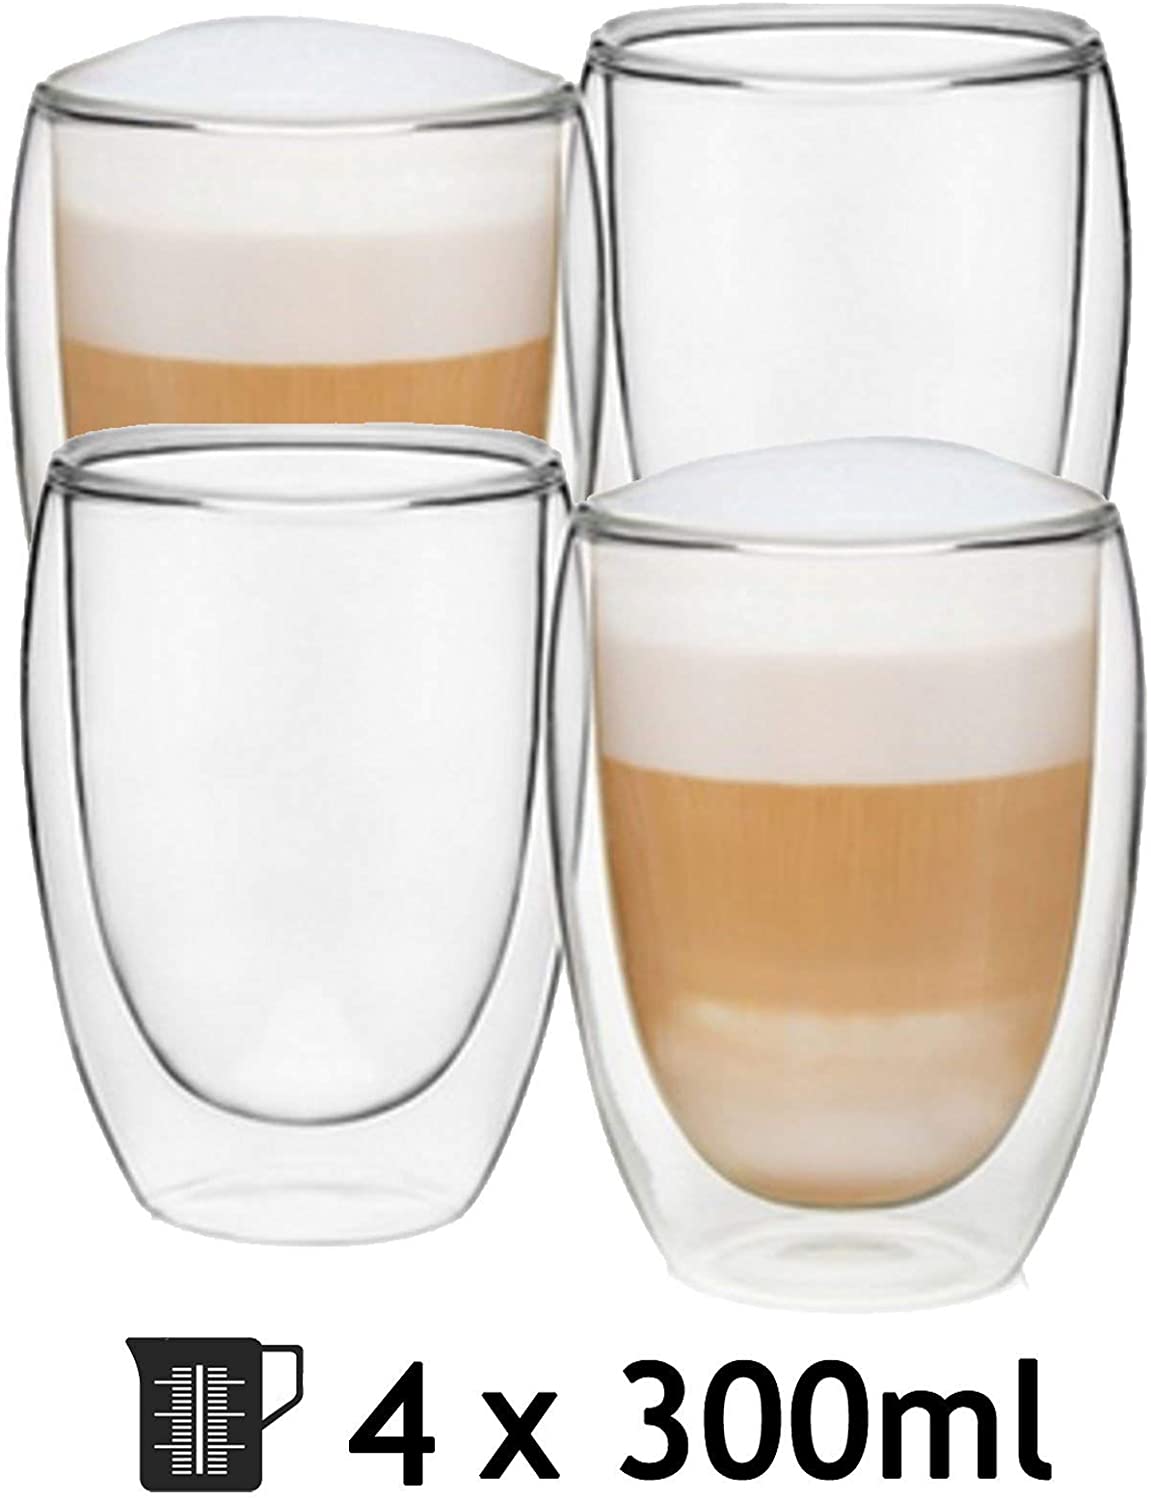 Double Walled Thermal Coffee Glass Tumbler Latte Cappuccino Cup Glasses 300ml x4